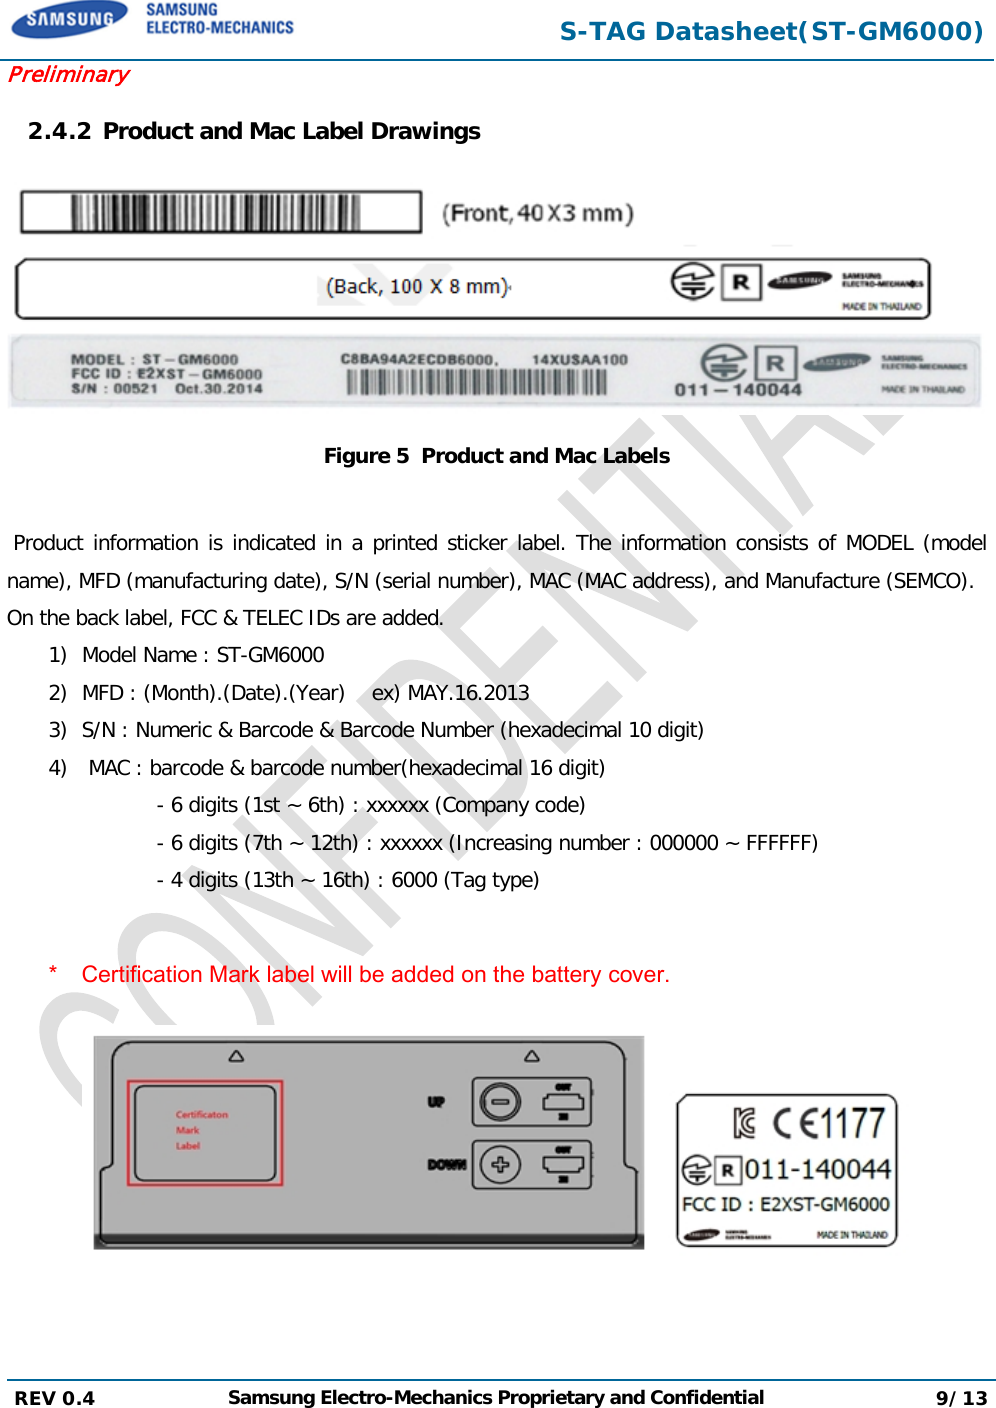  S-TAG Datasheet(ST-GM6000) Preliminary 2.4.2 Product and Mac Label Drawings  Figure 5  Product and Mac Labels   Product information is indicated in a printed sticker label. The information consists of MODEL (model name), MFD (manufacturing date), S/N (serial number), MAC (MAC address), and Manufacture (SEMCO). On the back label, FCC &amp; TELEC IDs are added. 1) Model Name : ST-GM6000 2) MFD : (Month).(Date).(Year)    ex) MAY.16.2013 3) S/N : Numeric &amp; Barcode &amp; Barcode Number (hexadecimal 10 digit) 4)  MAC : barcode &amp; barcode number(hexadecimal 16 digit)            - 6 digits (1st ~ 6th) : xxxxxx (Company code)            - 6 digits (7th ~ 12th) : xxxxxx (Increasing number : 000000 ~ FFFFFF)                 - 4 digits (13th ~ 16th) : 6000 (Tag type)  * Certification Mark label will be added on the battery cover.    REV 0.4  Samsung Electro-Mechanics Proprietary and Confidential 9/13   